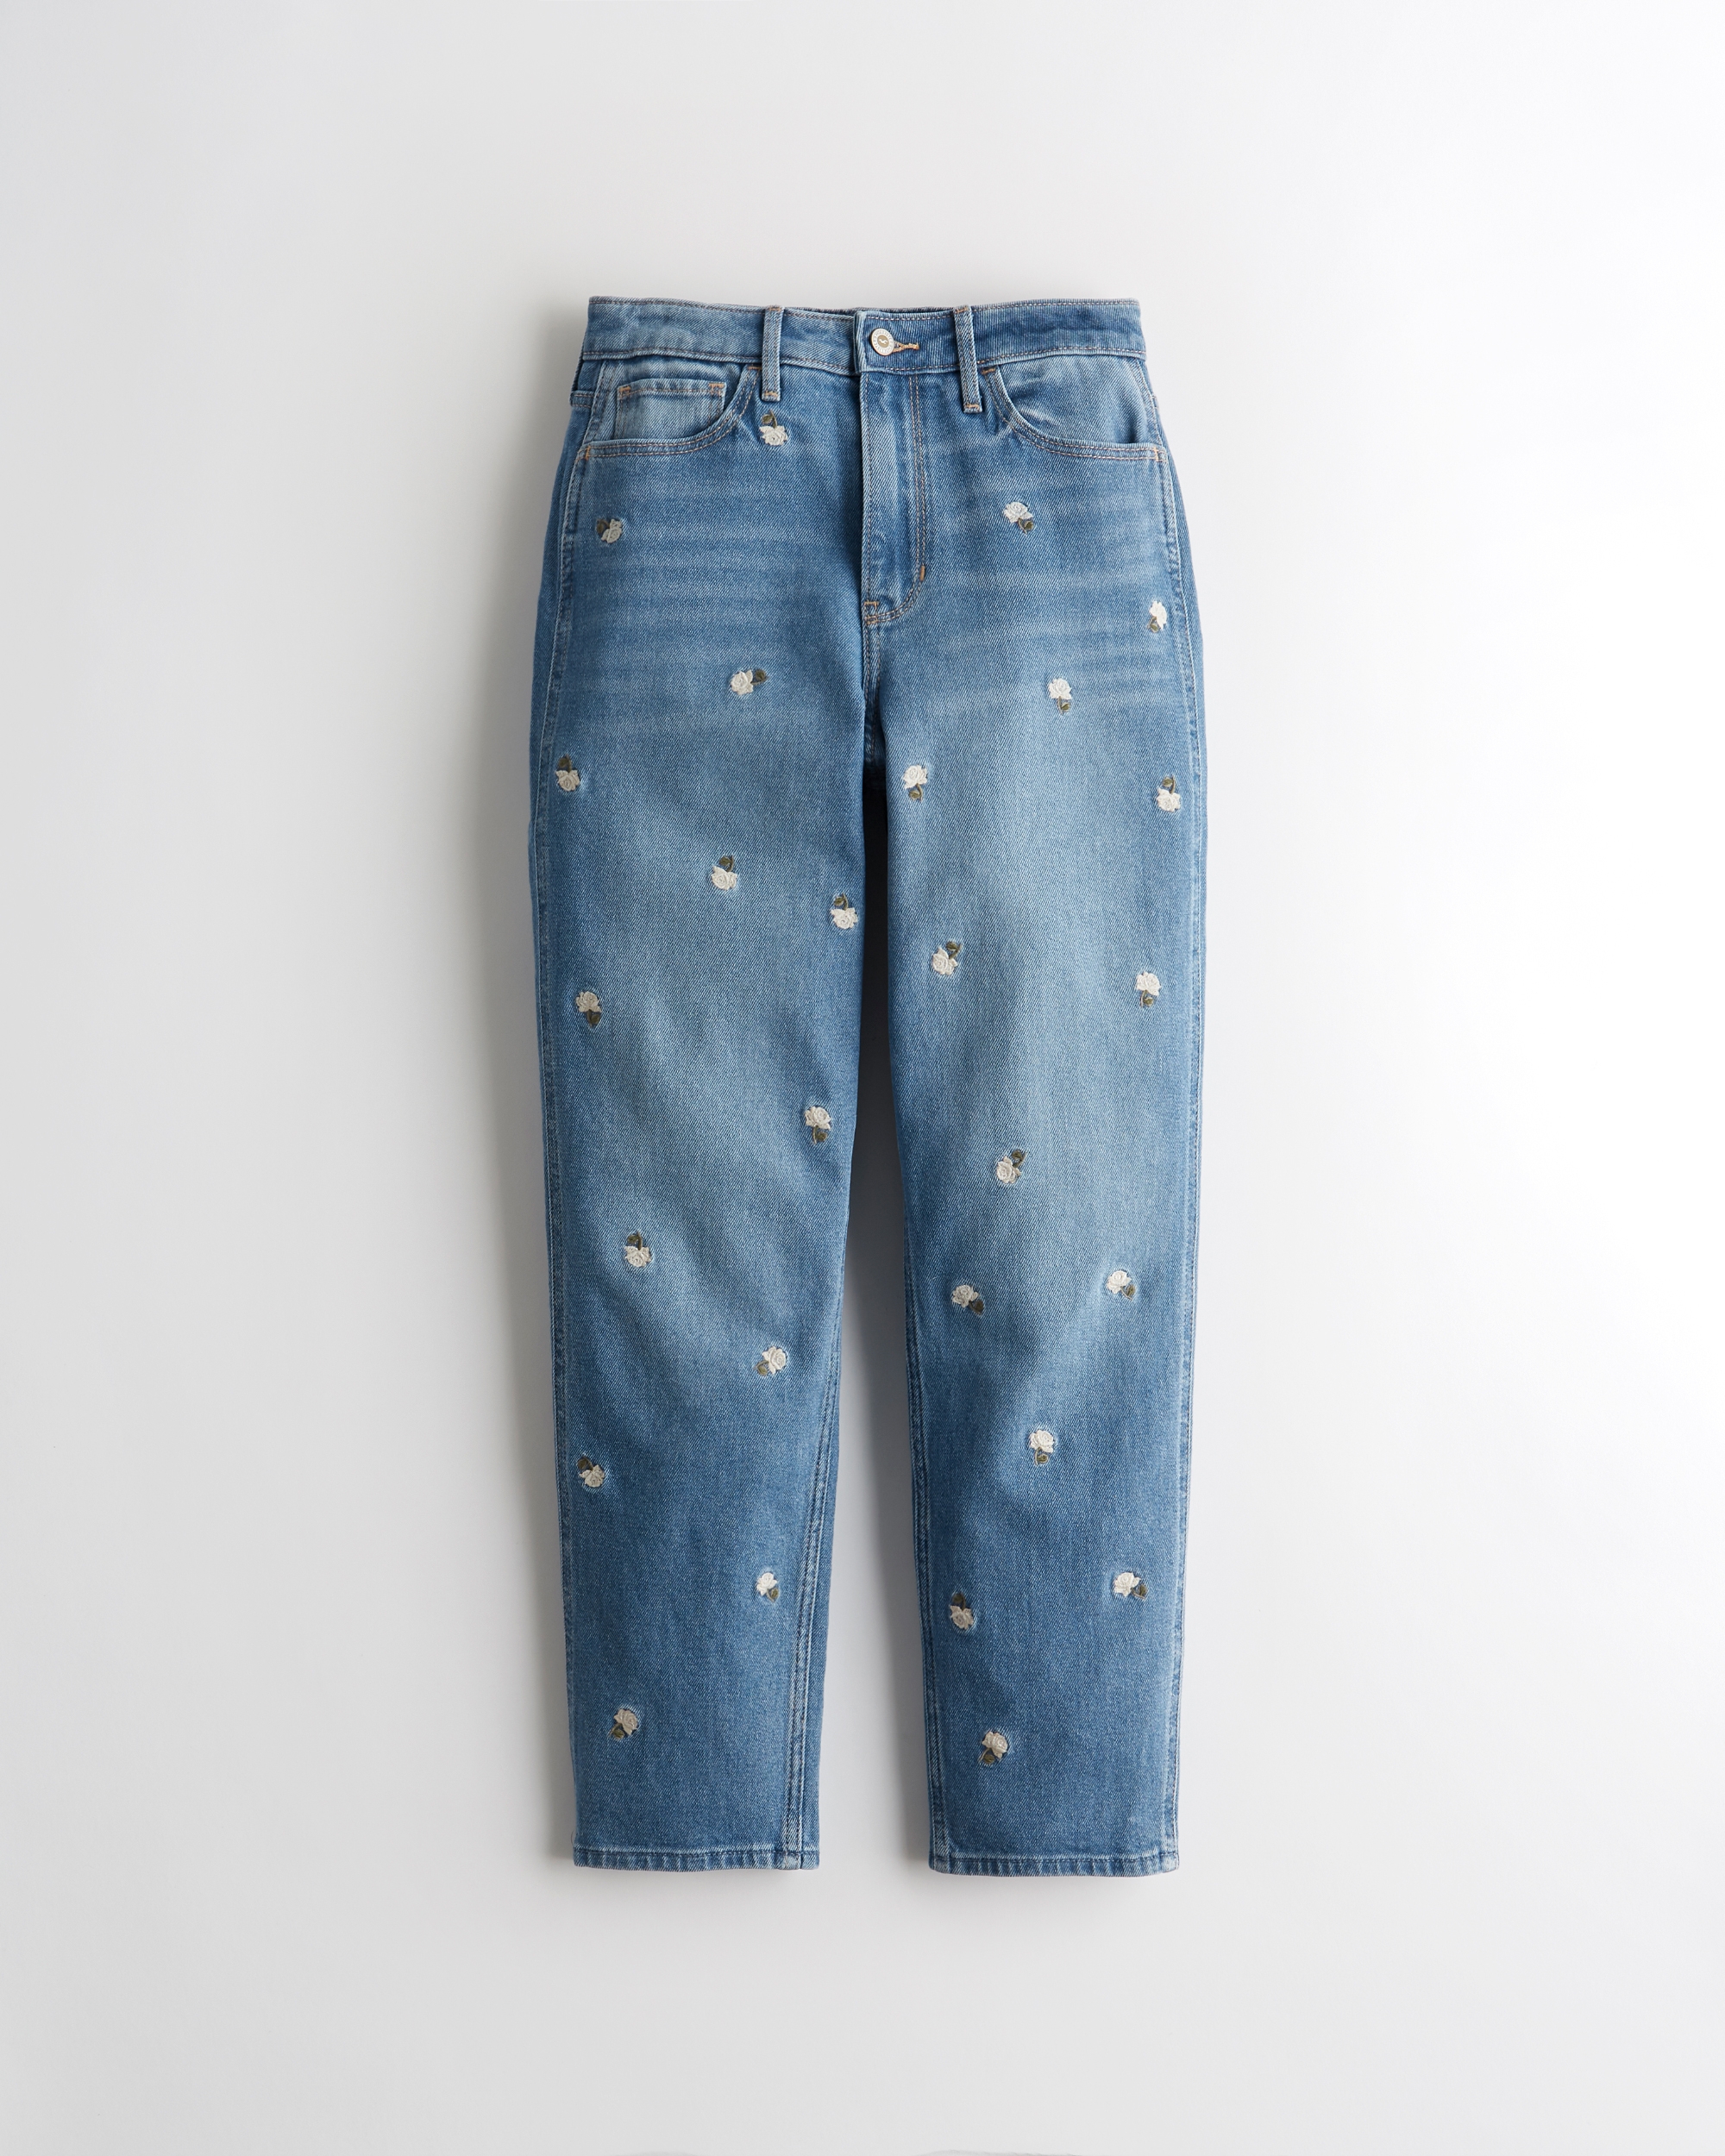 hollister jeans online india